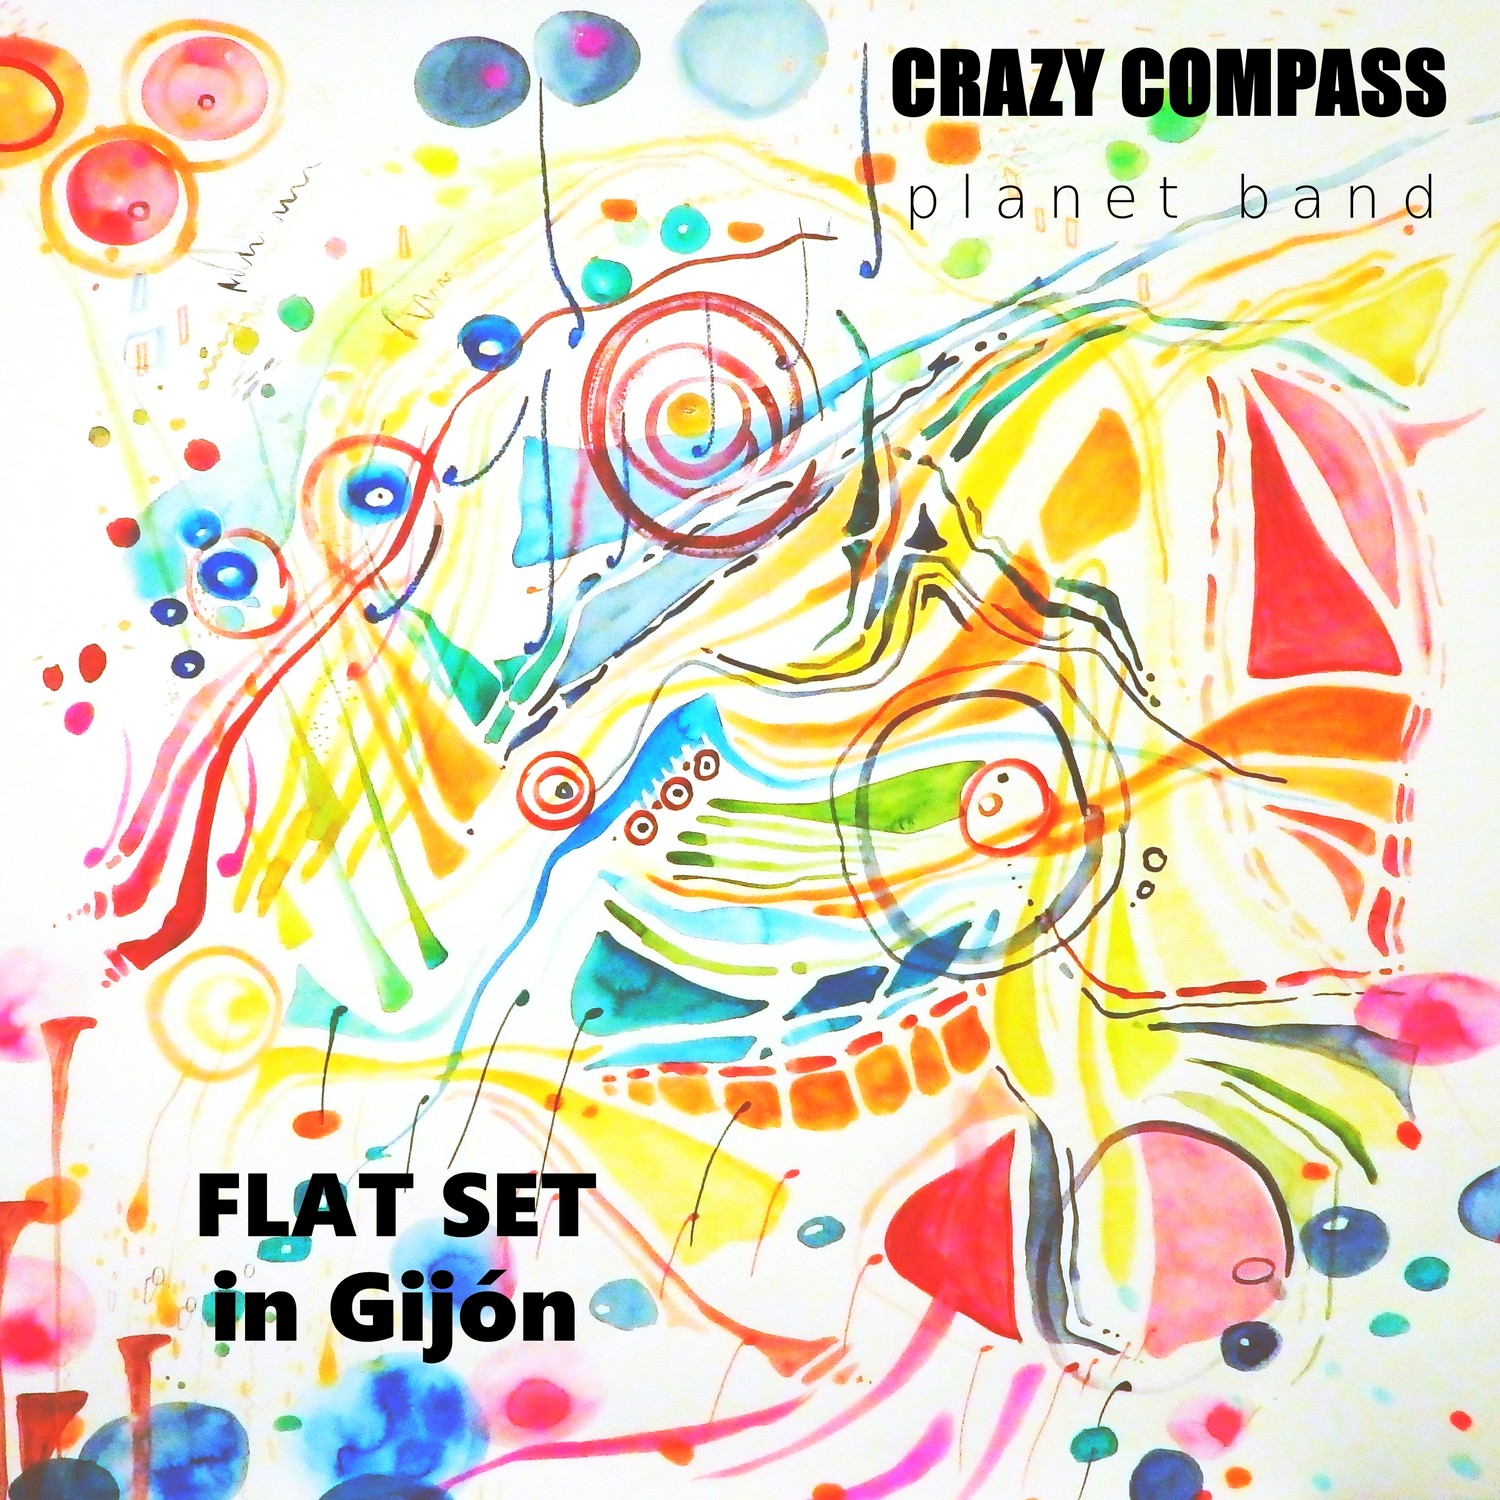 CRAZY COMPASS planet band - FLAT SET in Gijon.